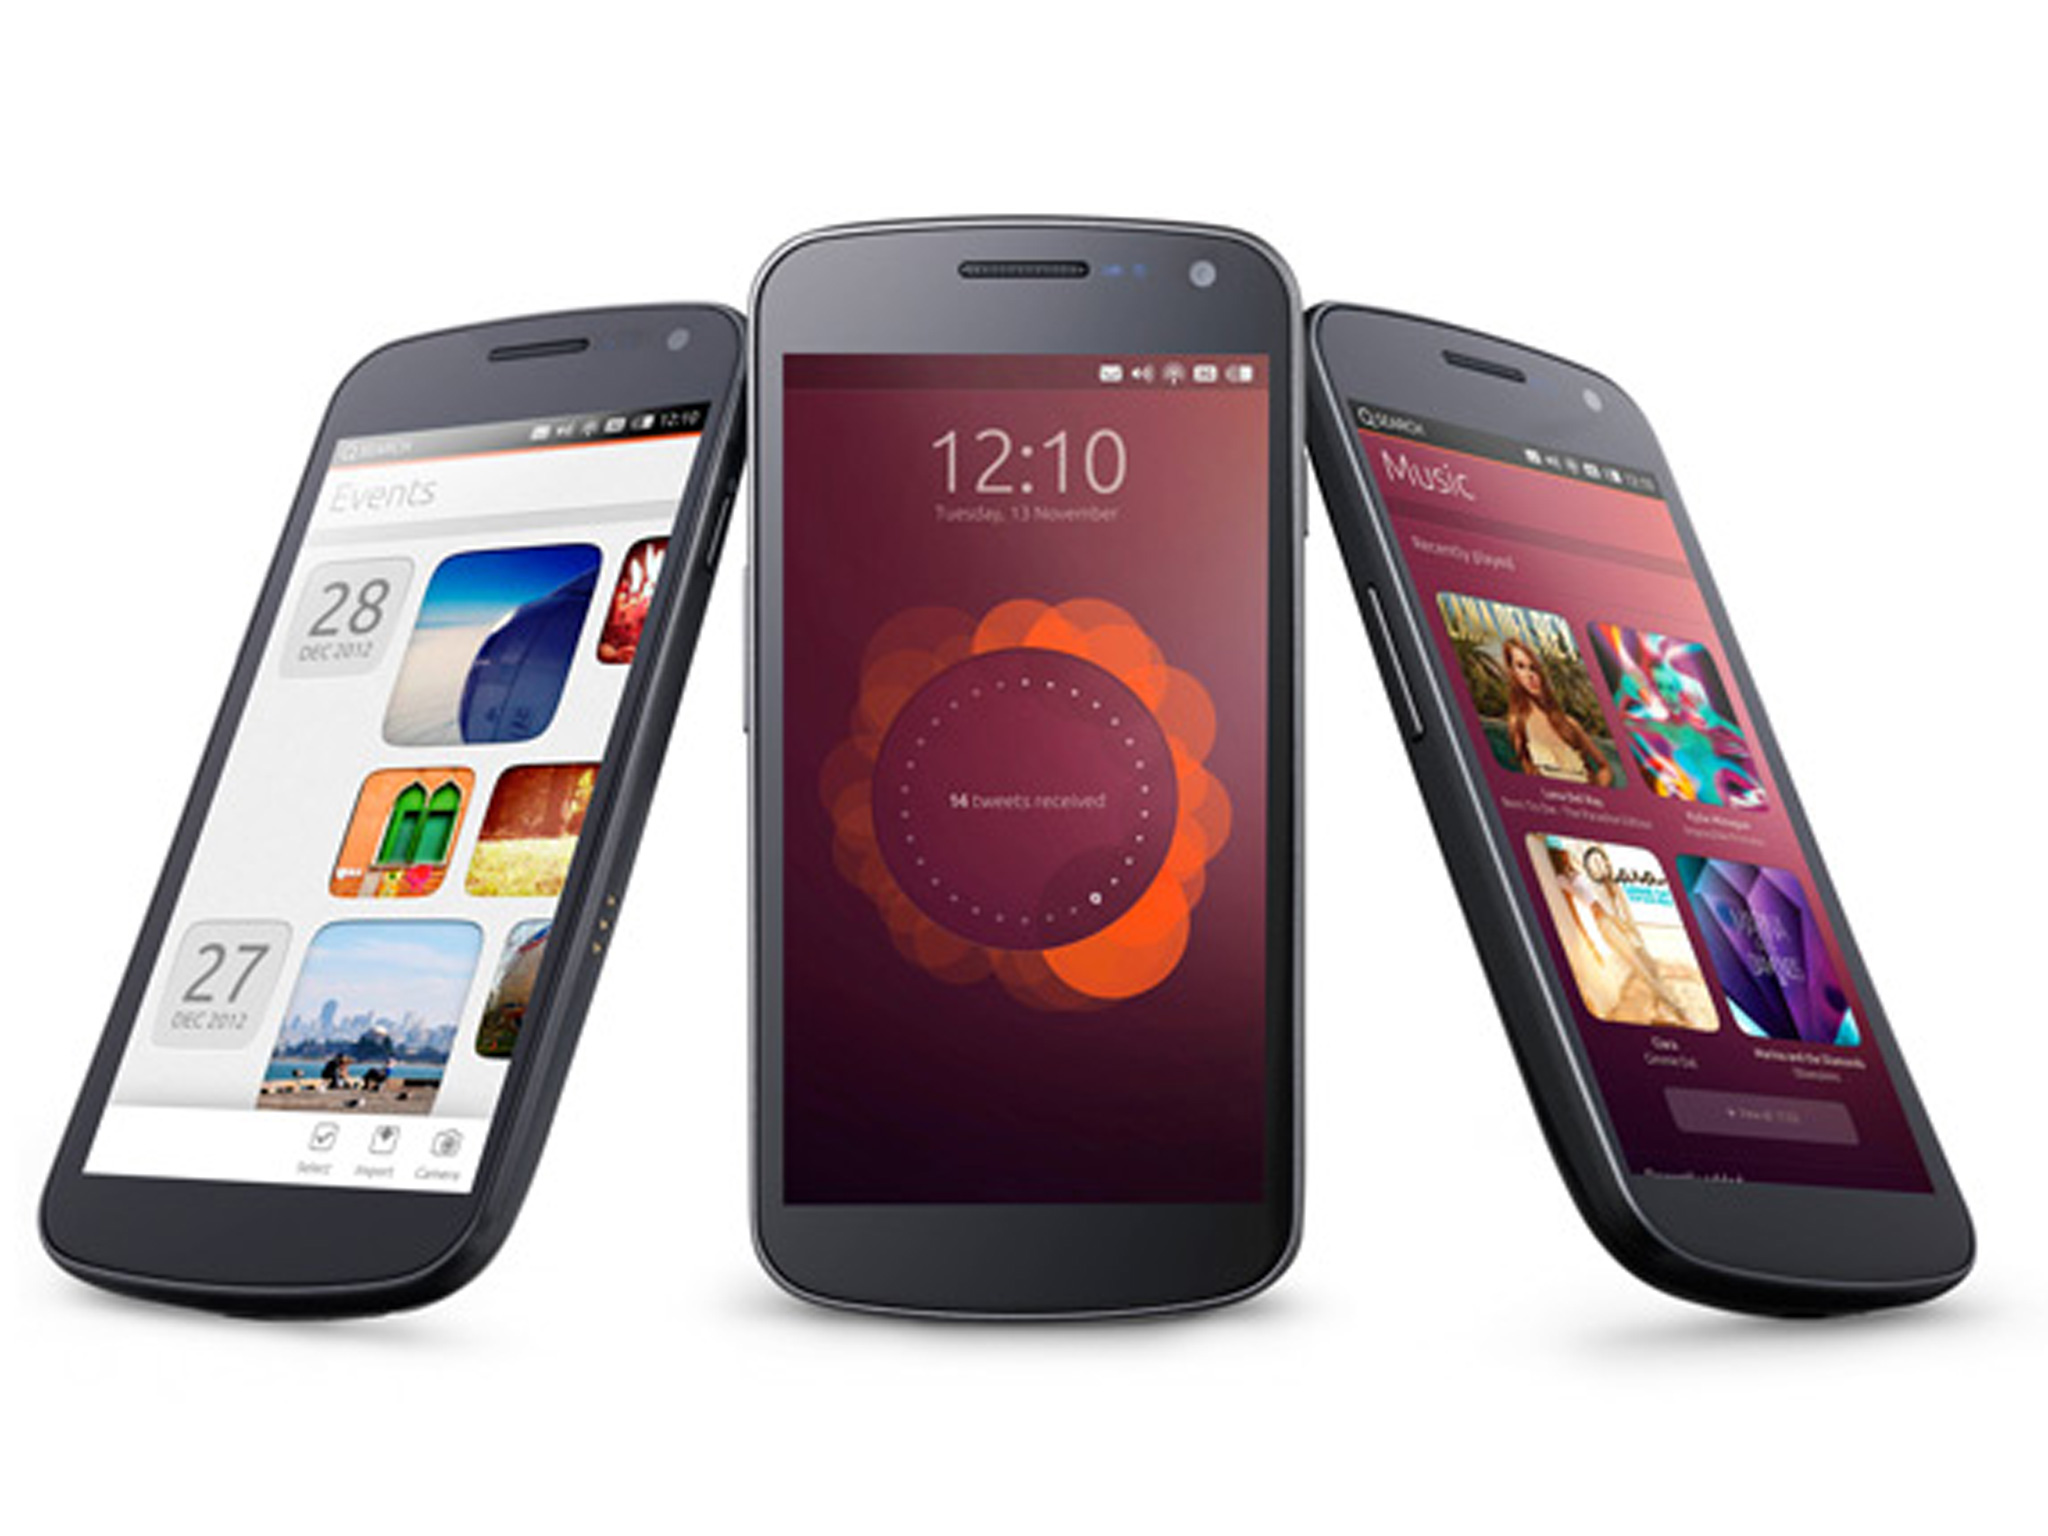 Ubuntu Mobile OS based phones to be launched in October